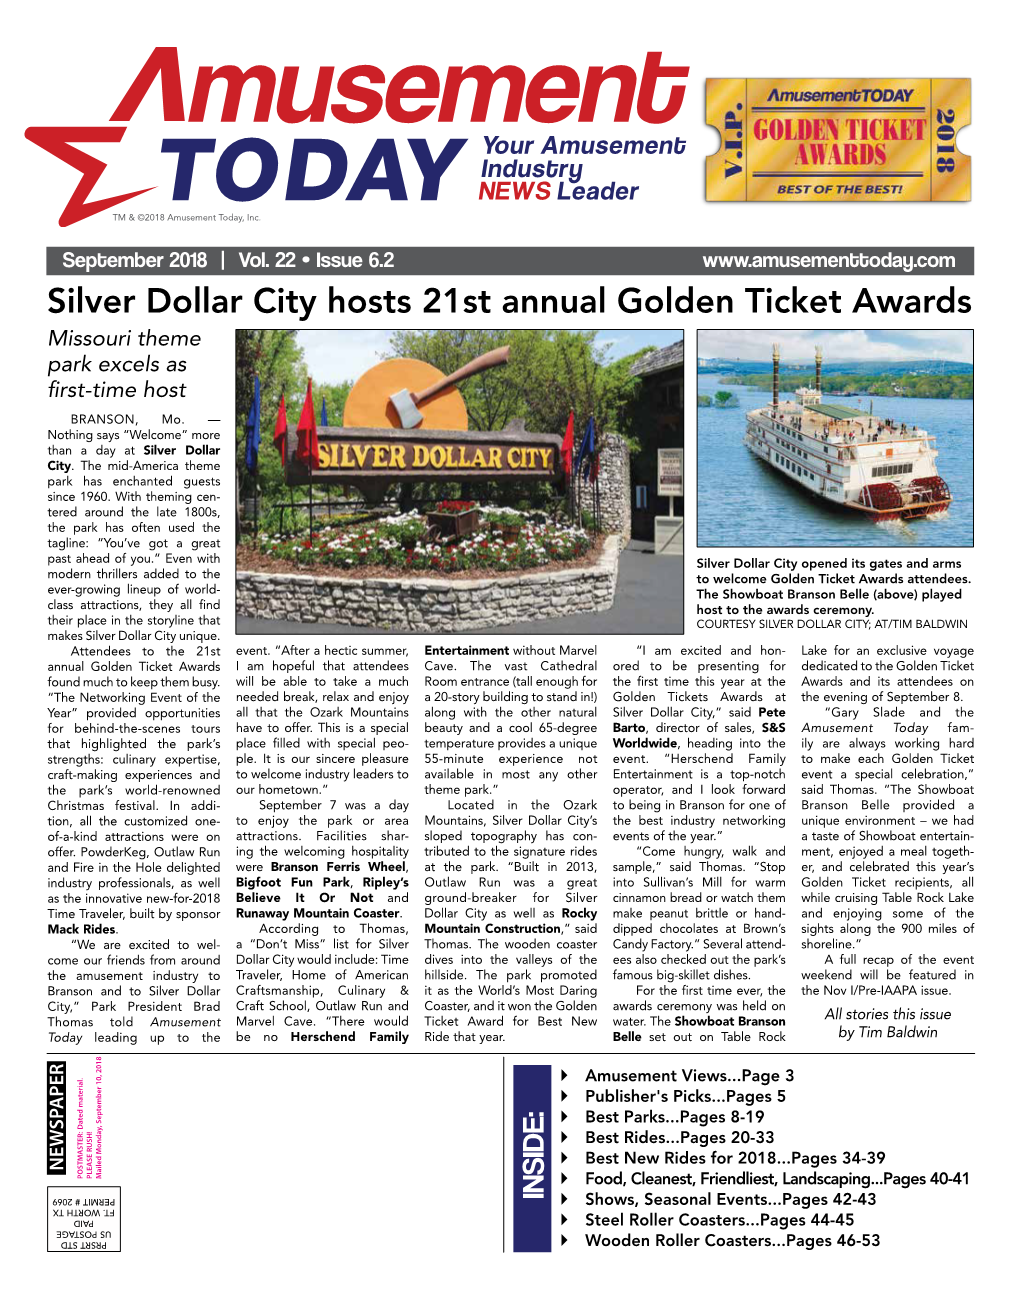 Silver Dollar City Hosts 21St Annual Golden Ticket Awards Missouri Theme Park Excels As First-Time Host BRANSON, Mo